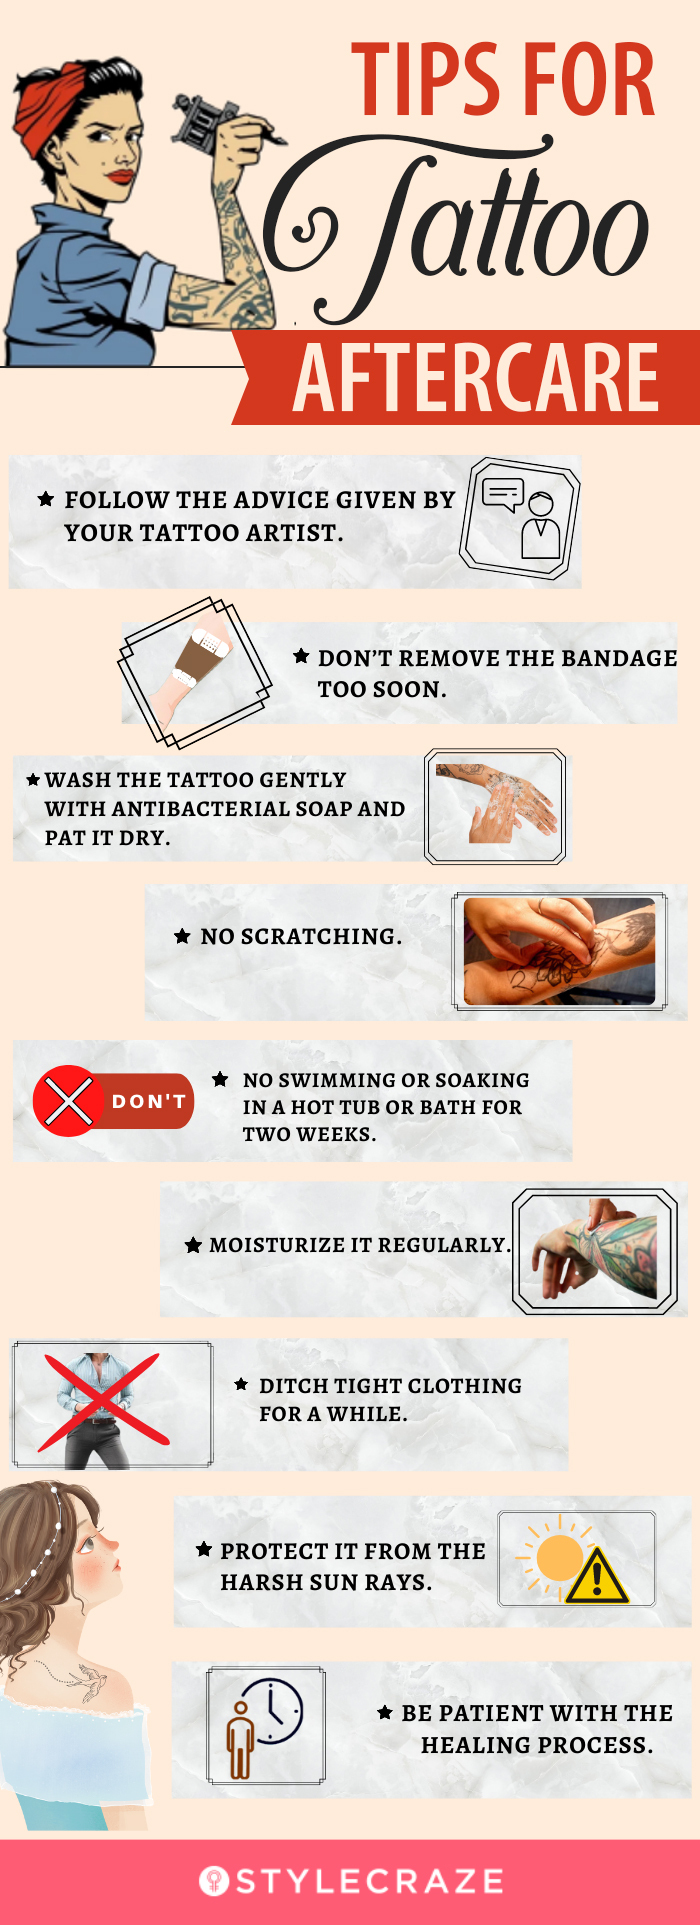 tips for tattoo aftercare (infographic)